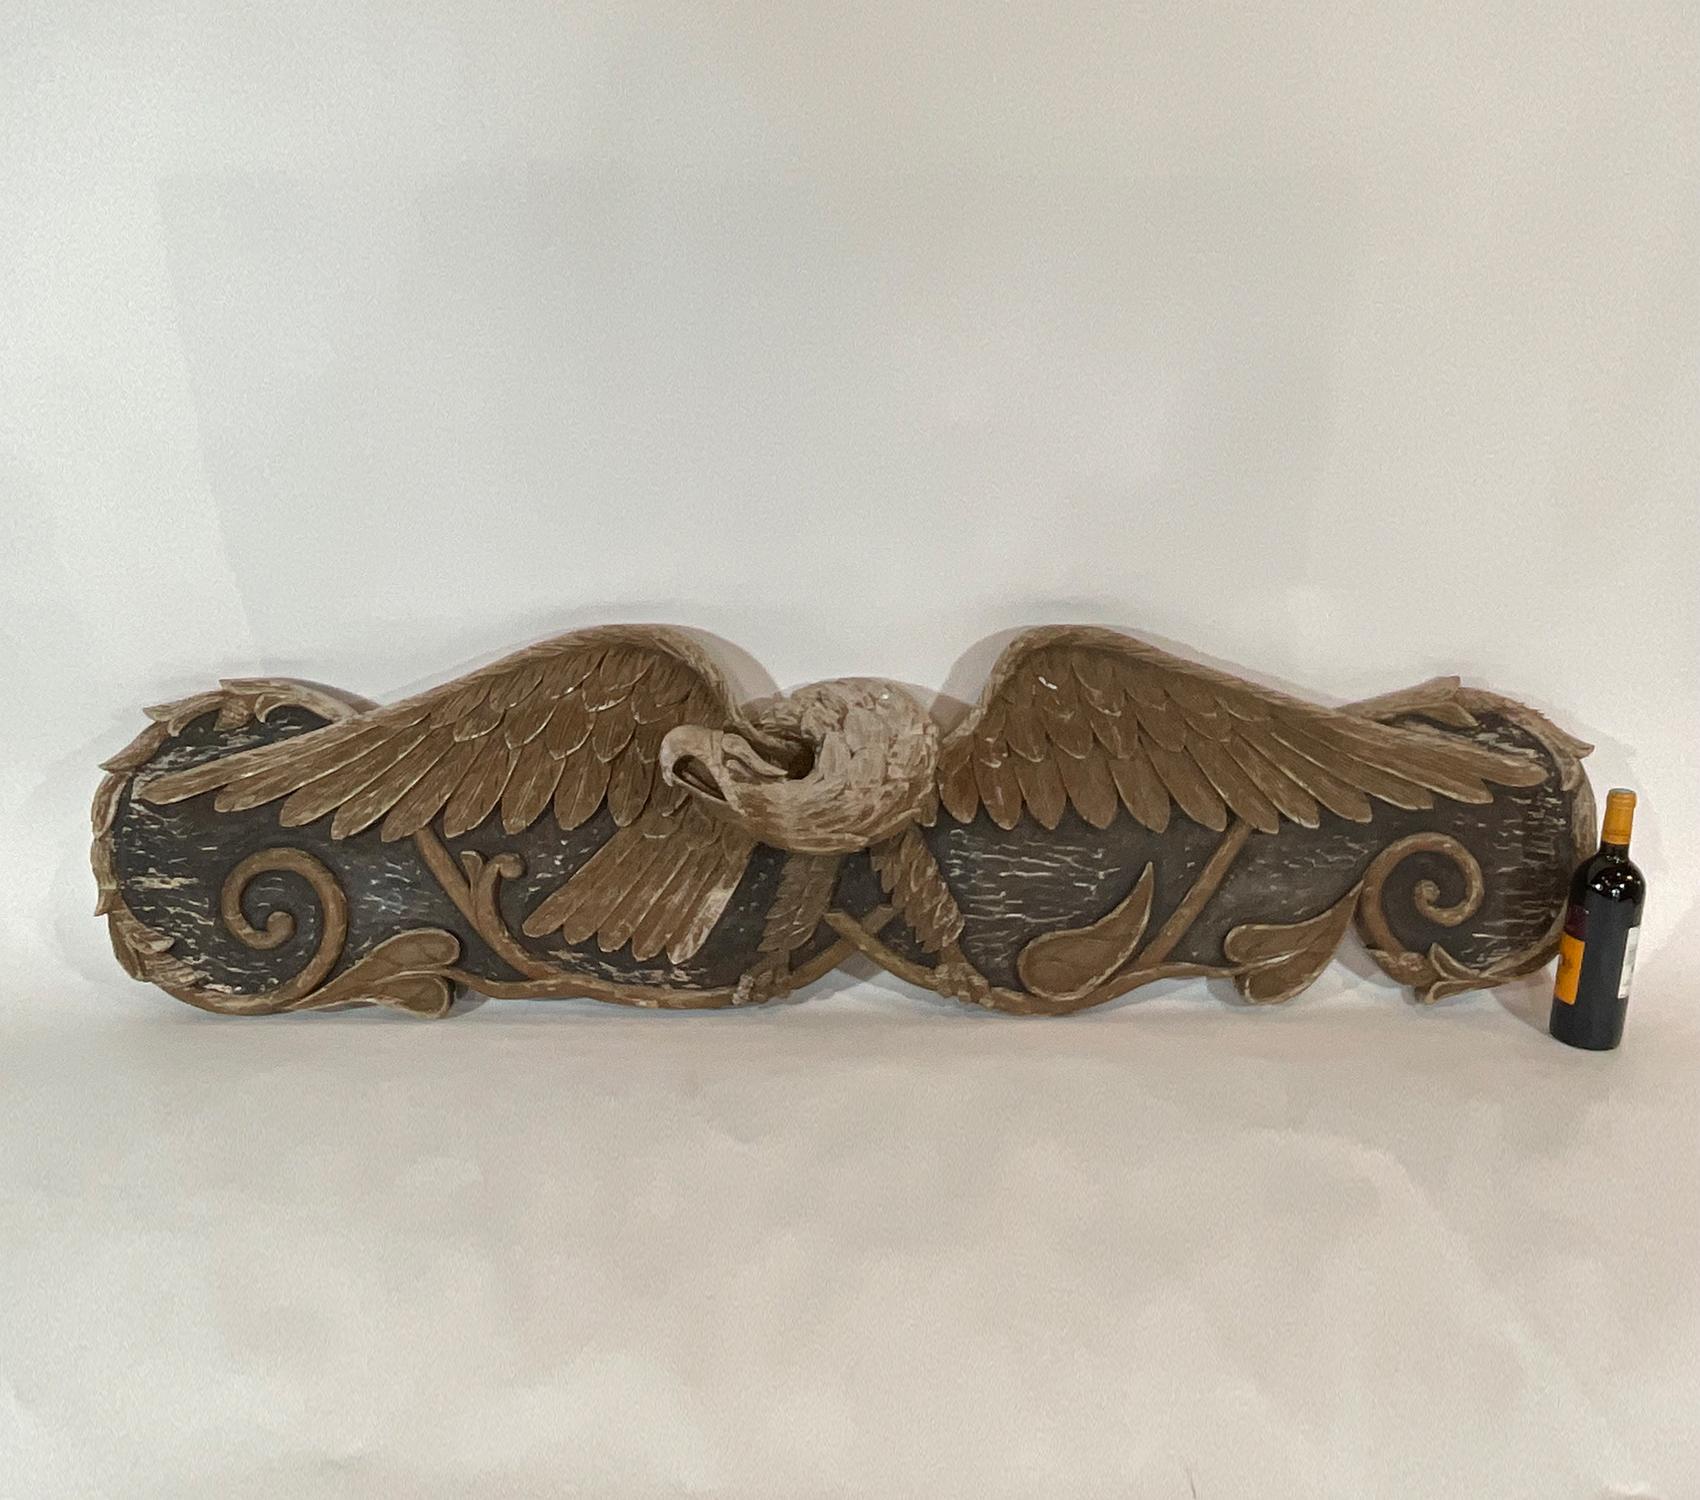 North American Six Foot Carved Eagle Stern Board